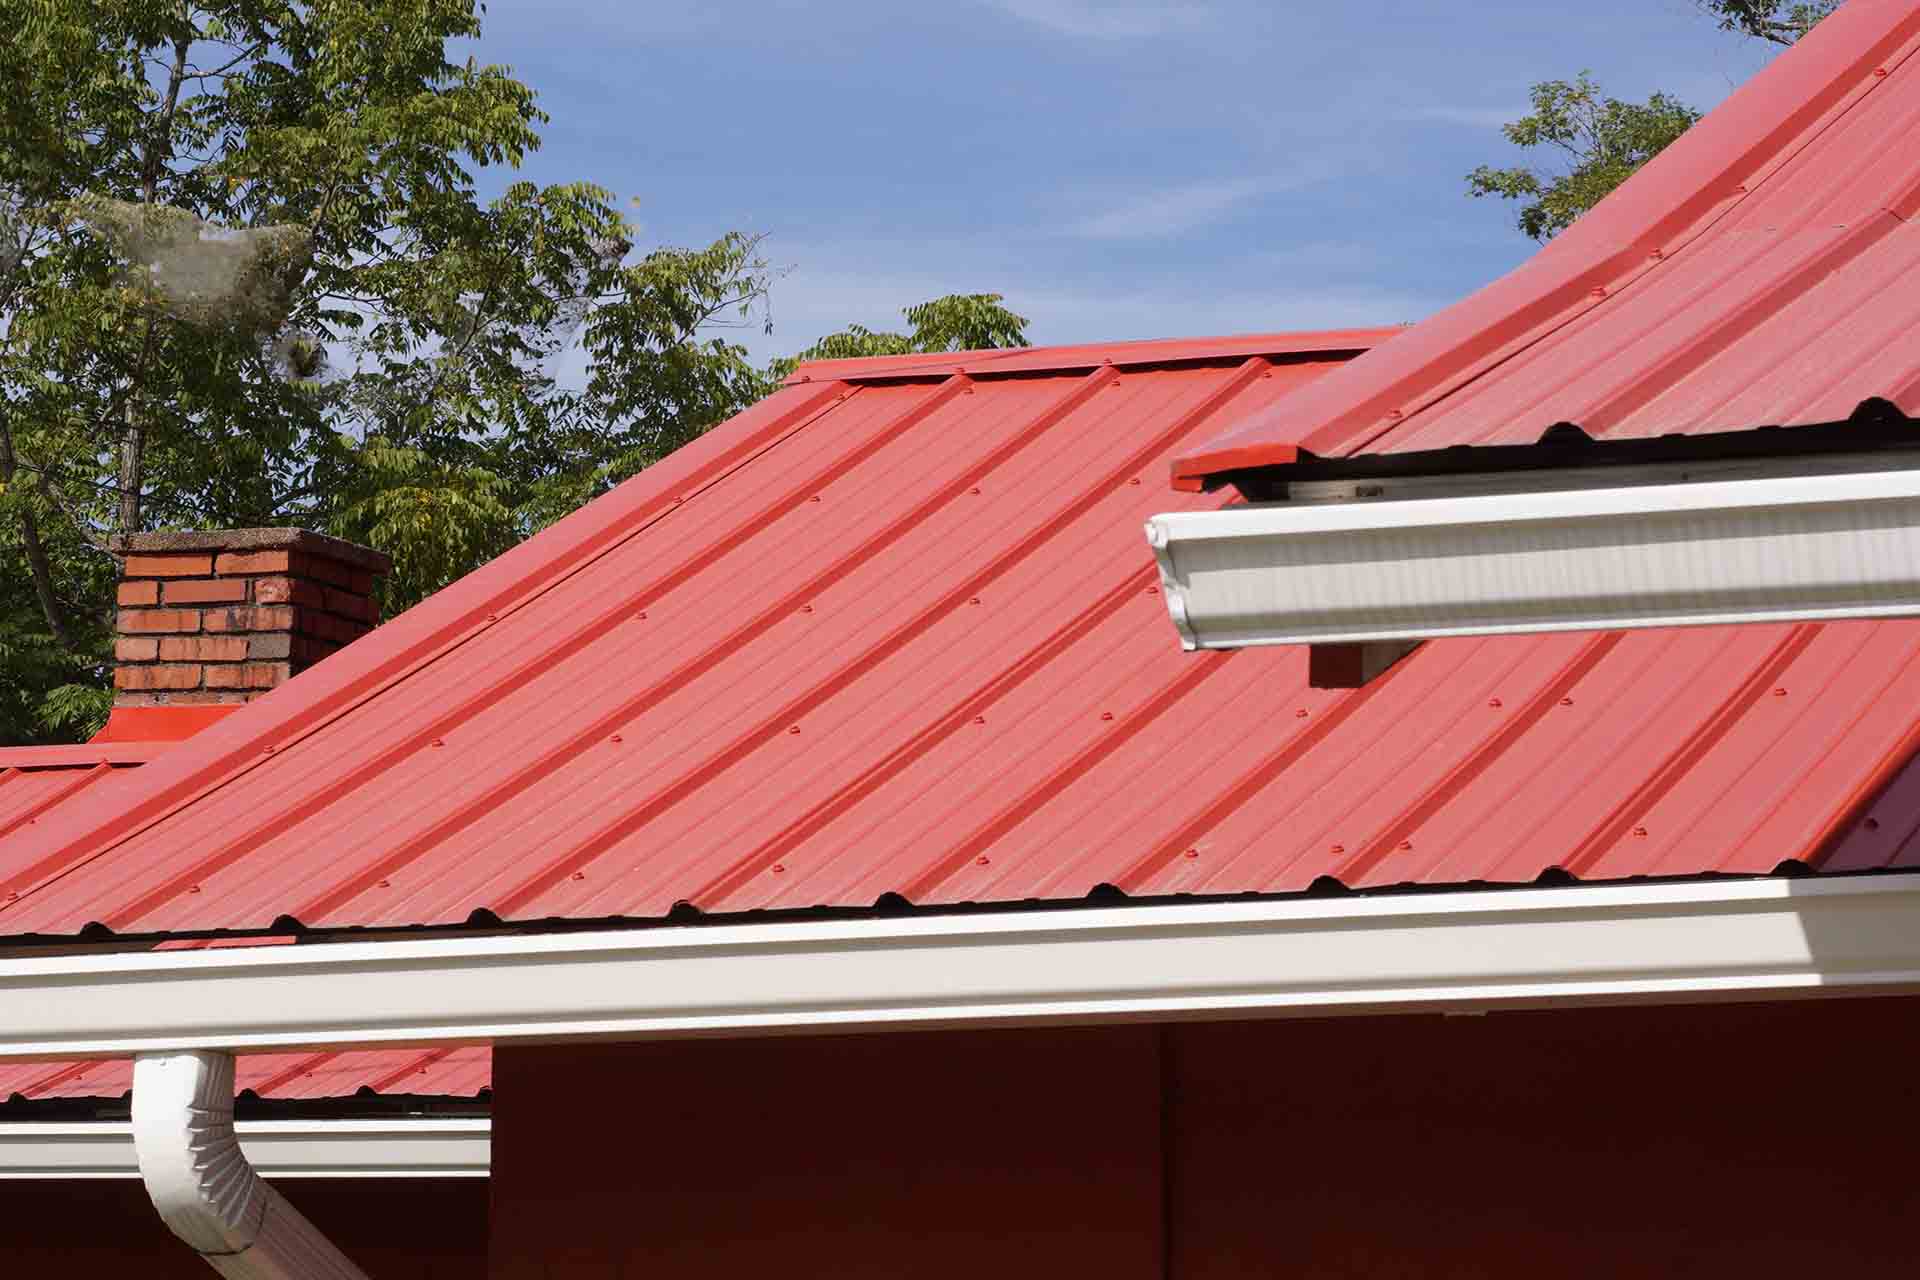 Metal Roofing vs. Shingles Pros and Cons